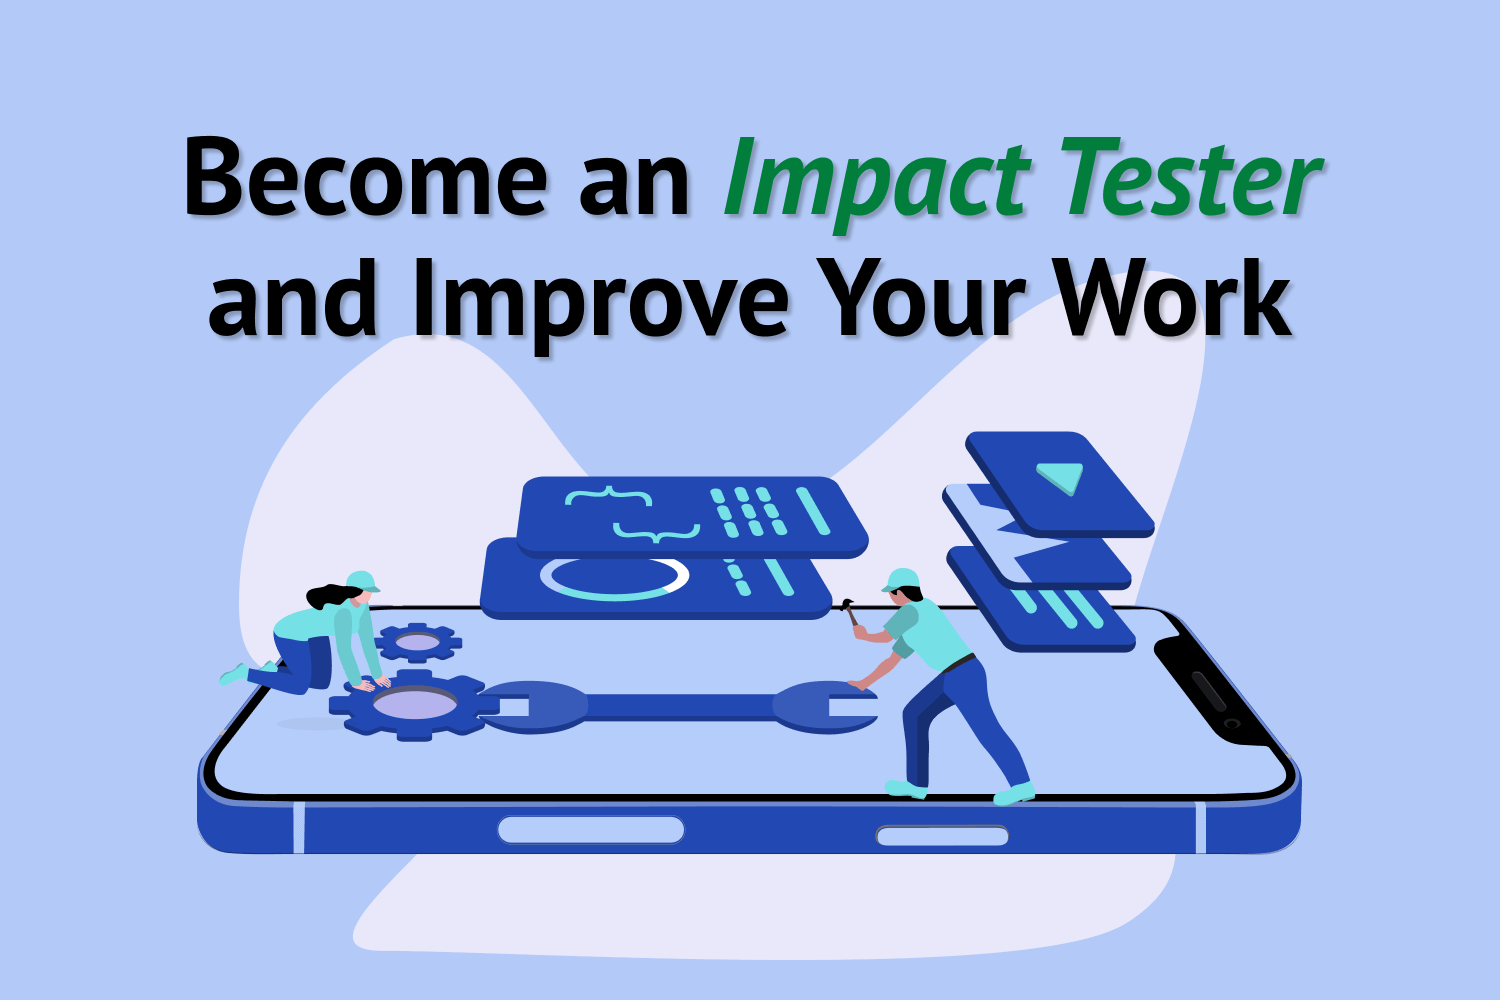 Become an Impact Tester and Improve Your Work